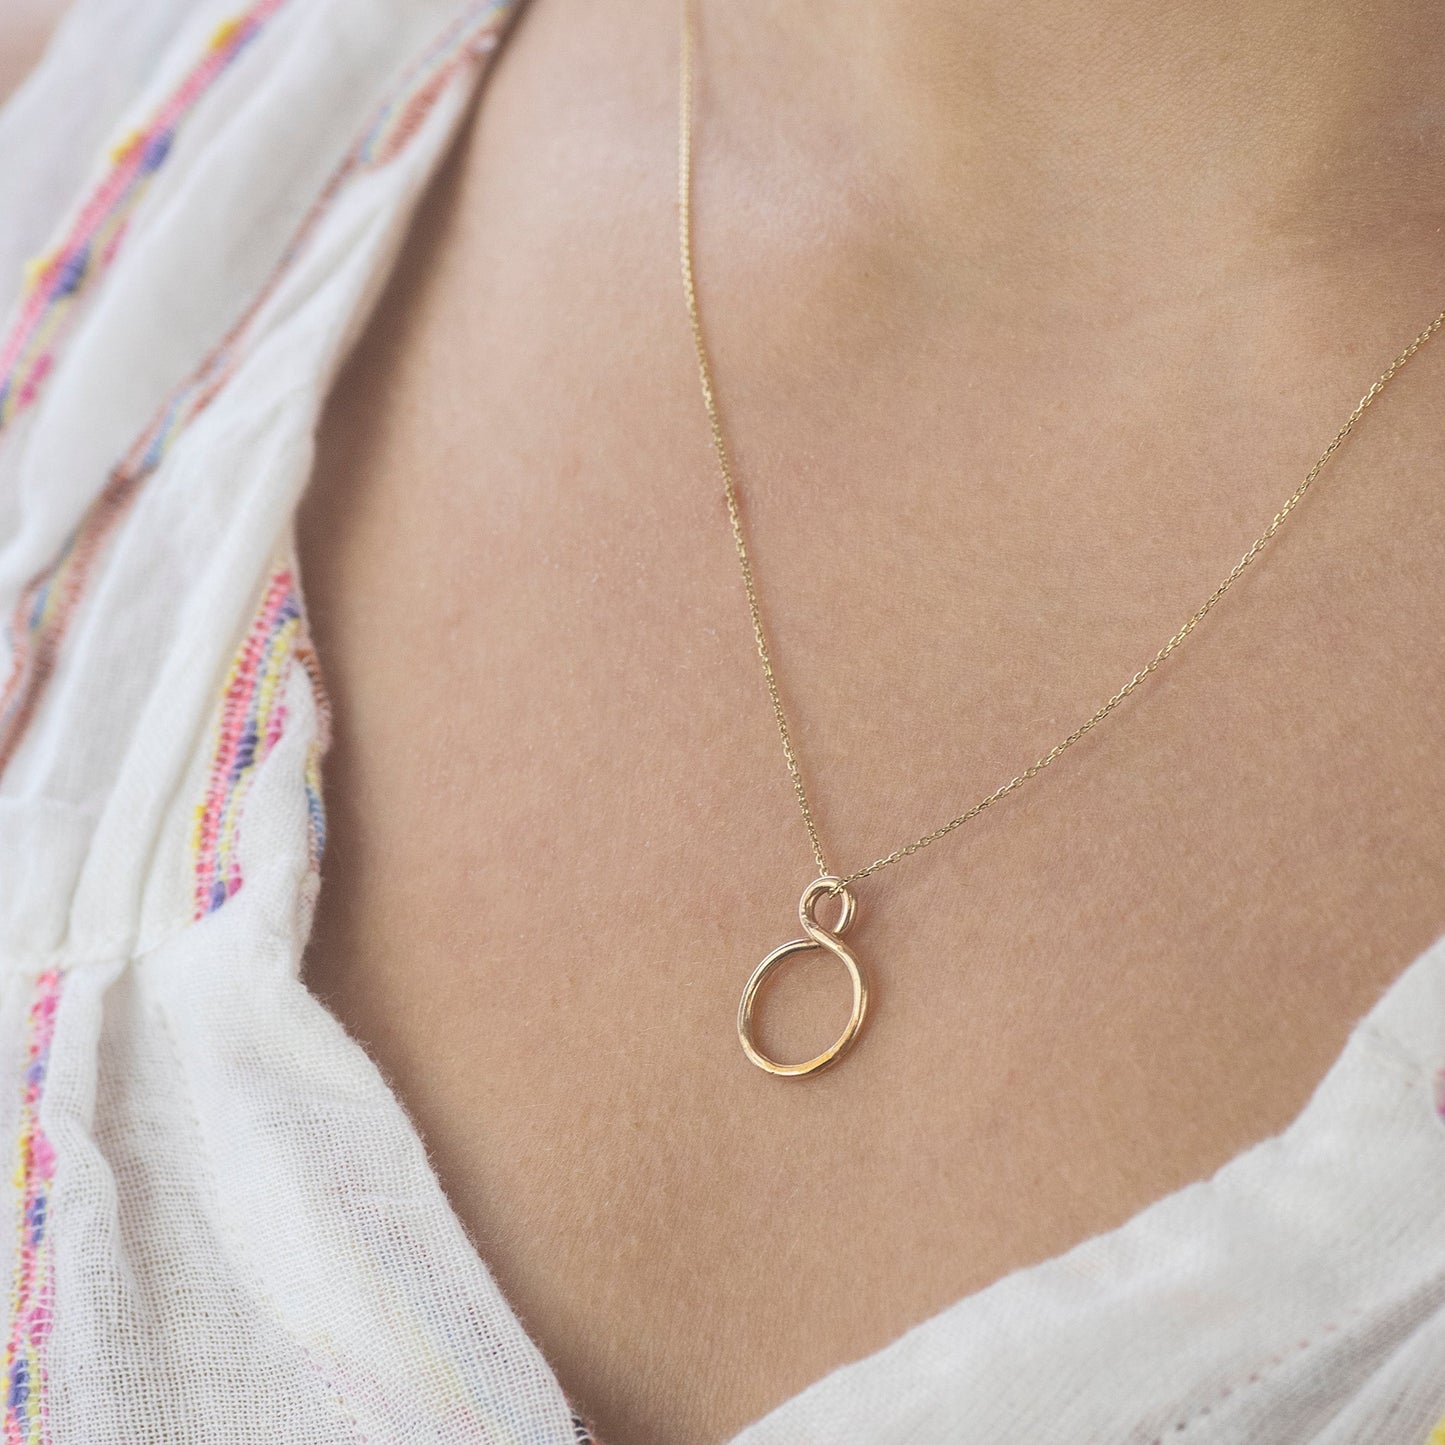 Gift for Daughter - Petite Infinity Necklace - 9kt Gold